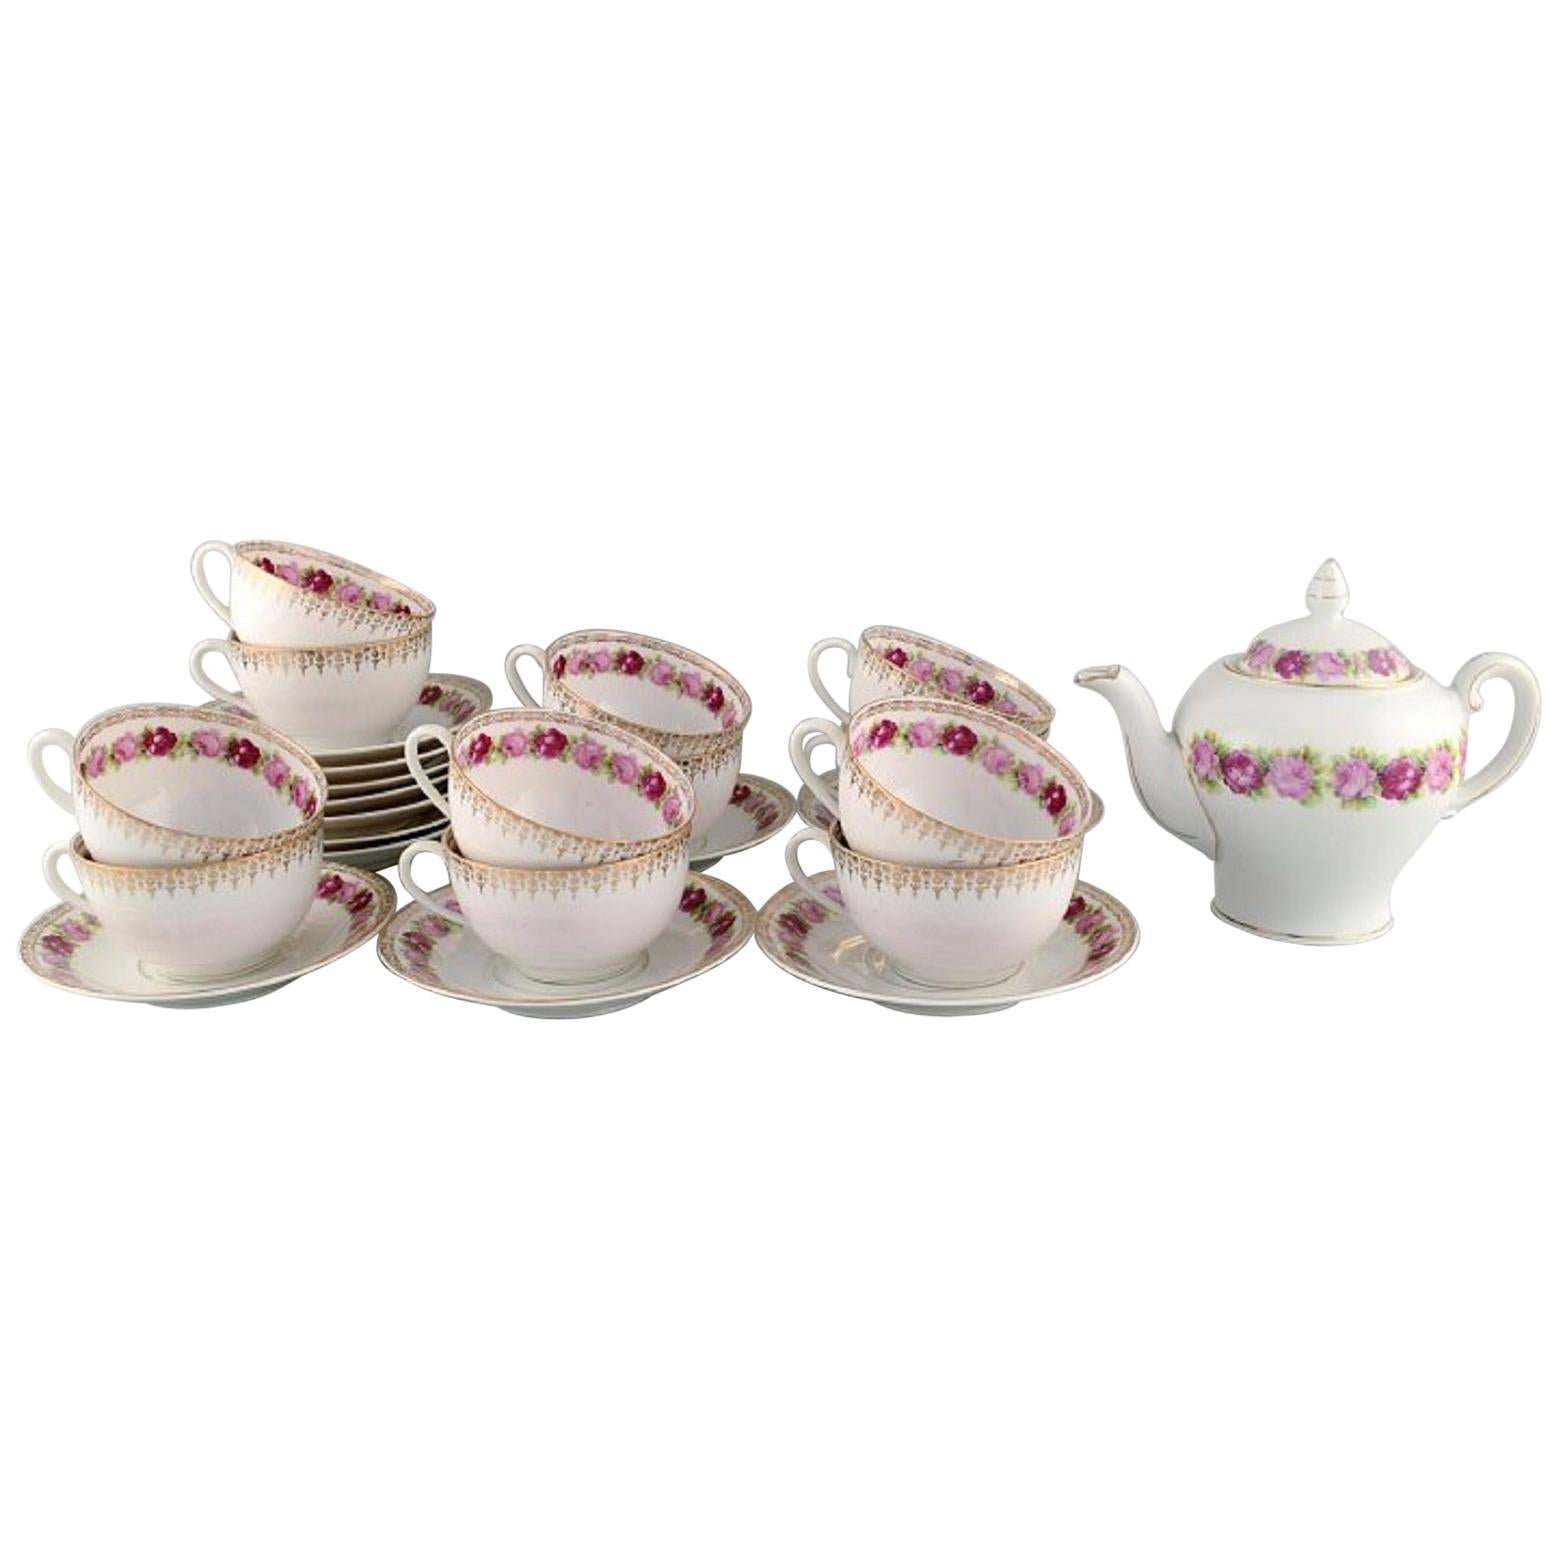 KPM, Berlin, Tea Service for 12 People in Hand Painted Porcelain with Flowers